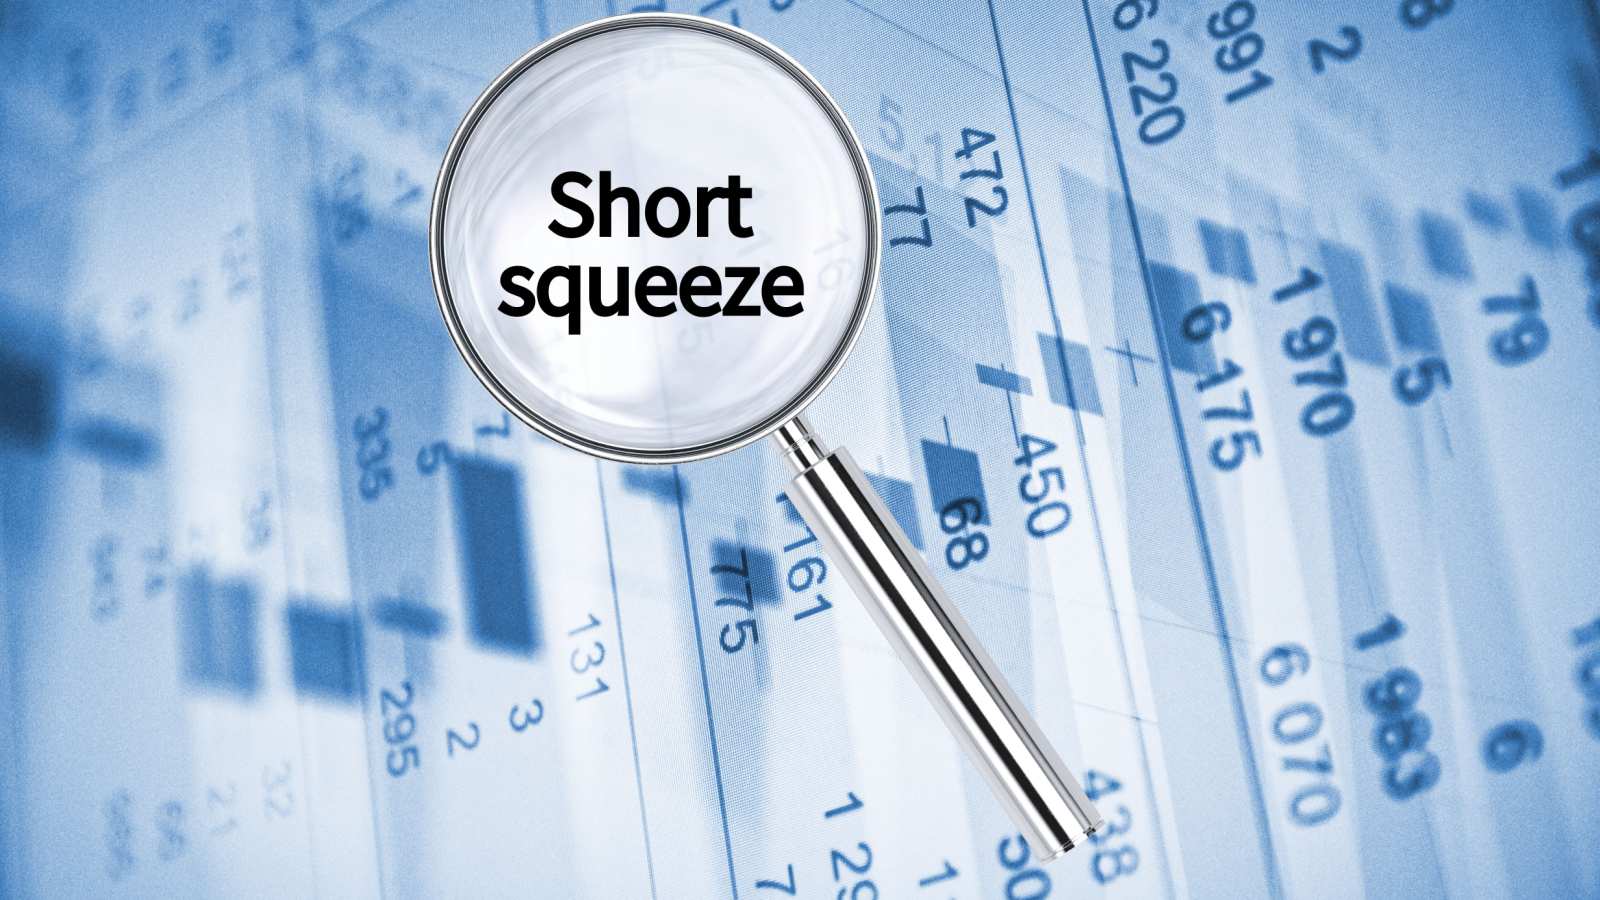 3 Secrets to Finding the Next Short-Squeeze Stocks